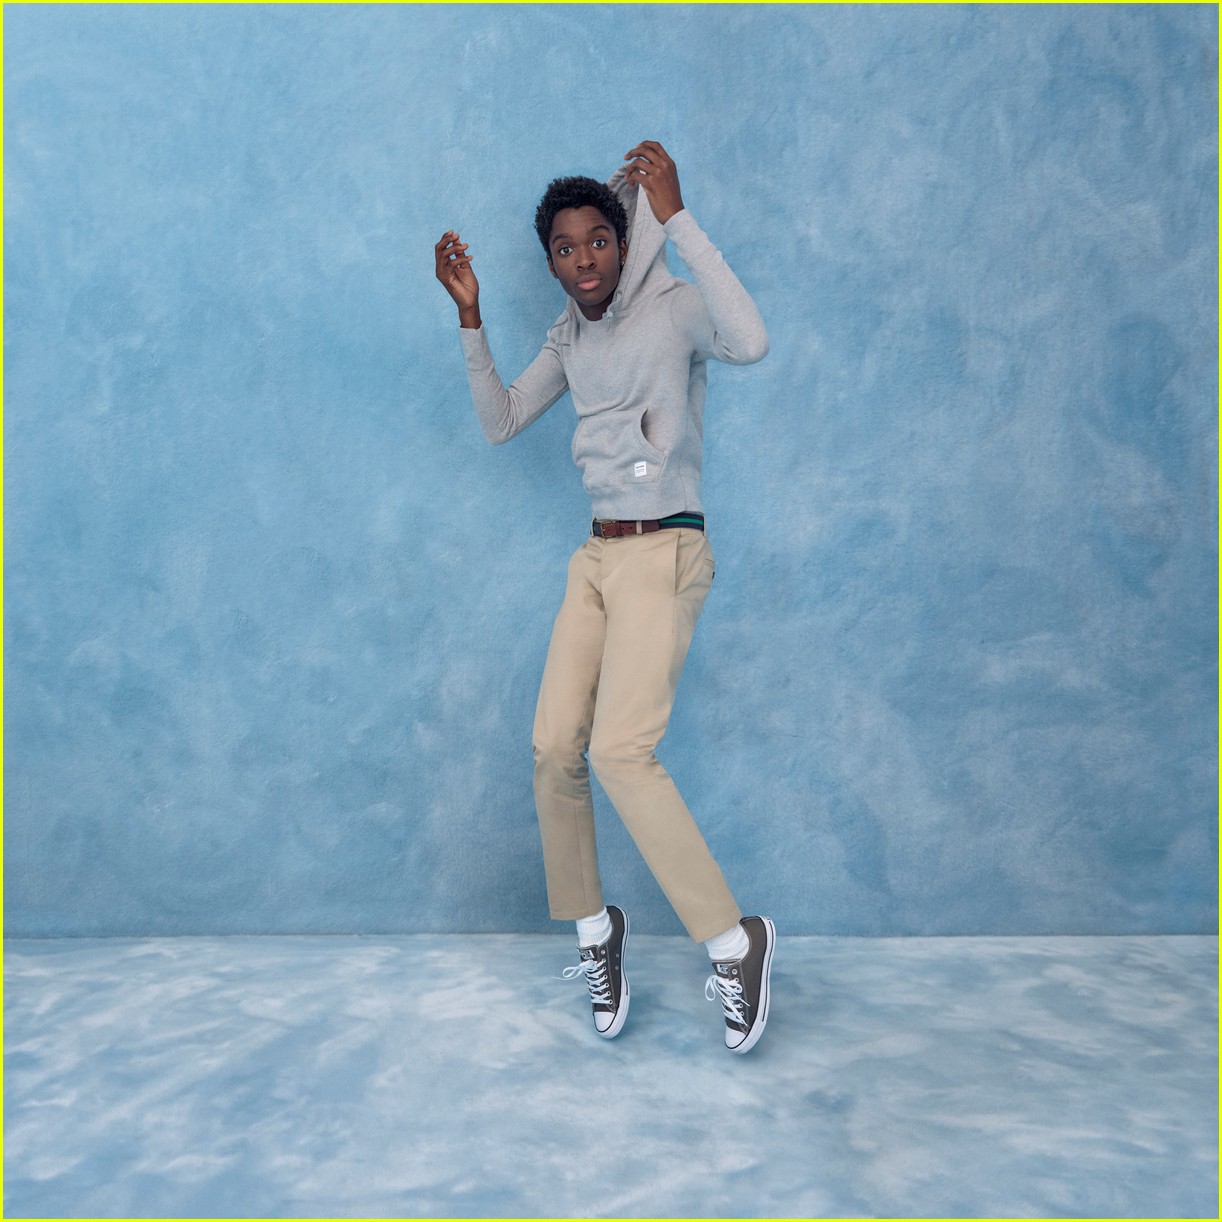 Marchitar Vandalir carril Cole Sprouse & Sabrina Carpenter Show Off Their Styles for Converse  Campaign: Photo 1121951 | Alisha Boe, Alton Mason, Cole Sprouse, Sabrina  Carpenter, Selah Marley, Taylor Hill Pictures | Just Jared Jr.